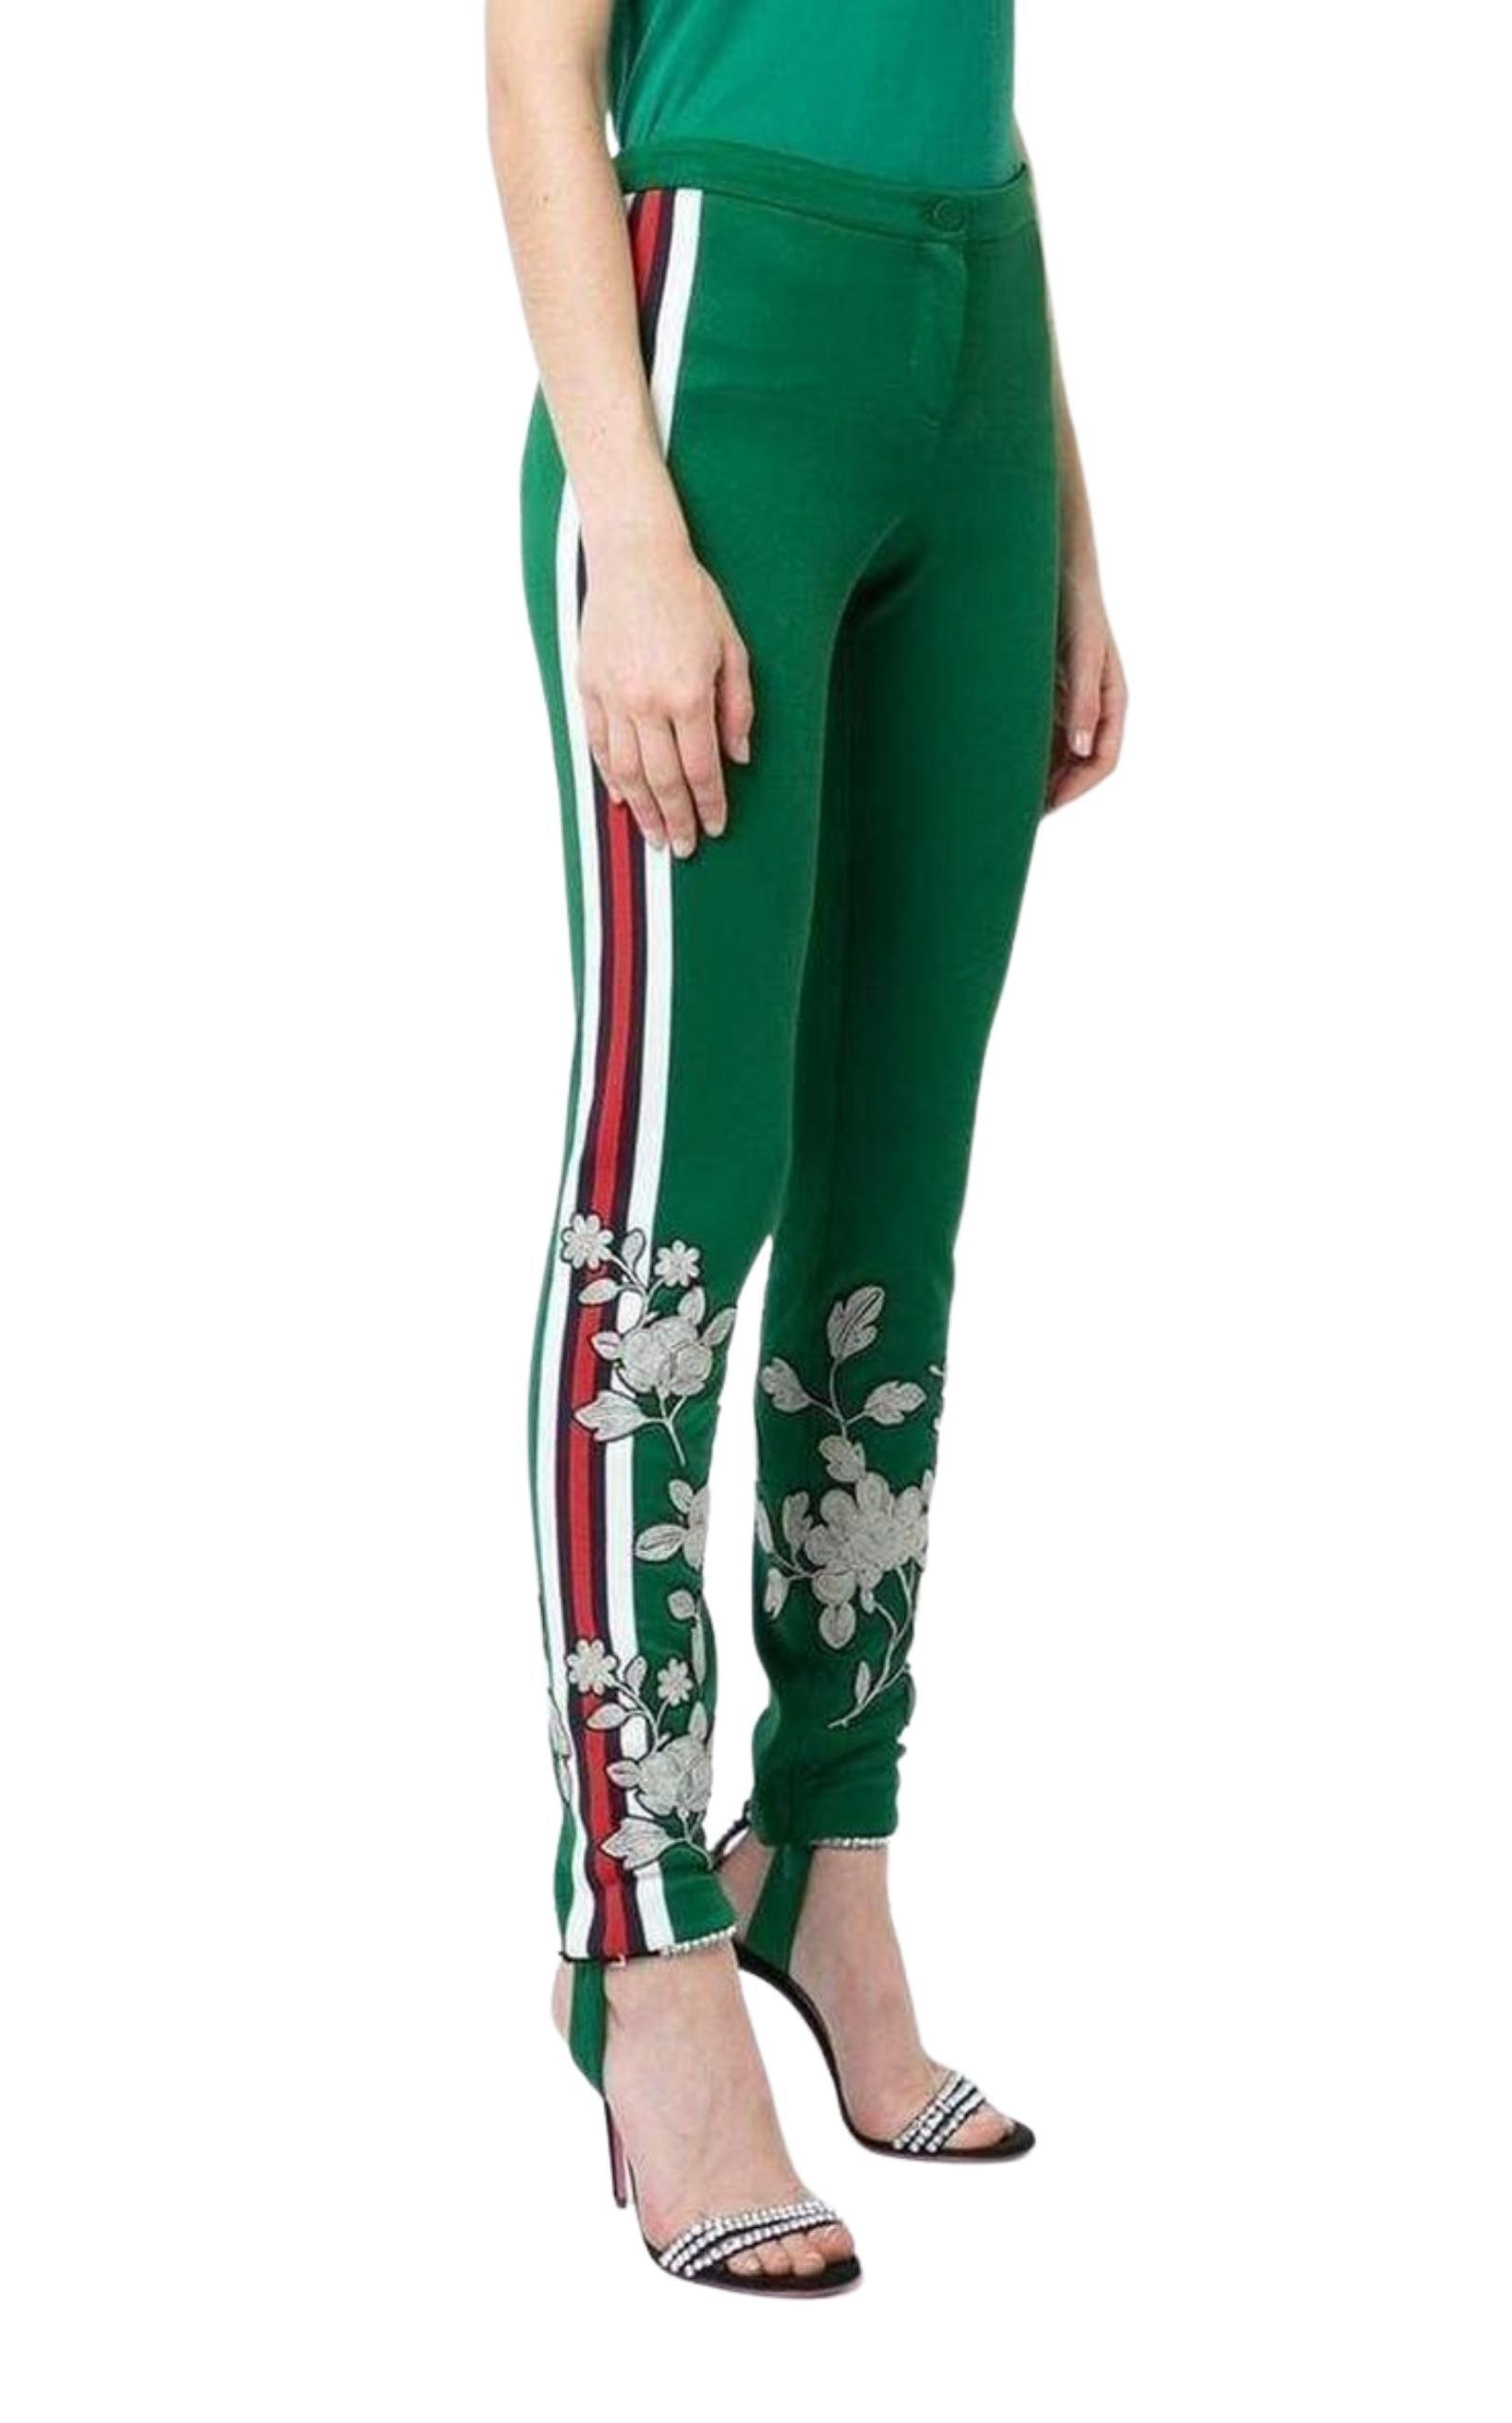 NWT GUCCI LEGGINGS/SKINNY PANTS WITH WEB STRIPE AND FLOWER EMBROIDERED